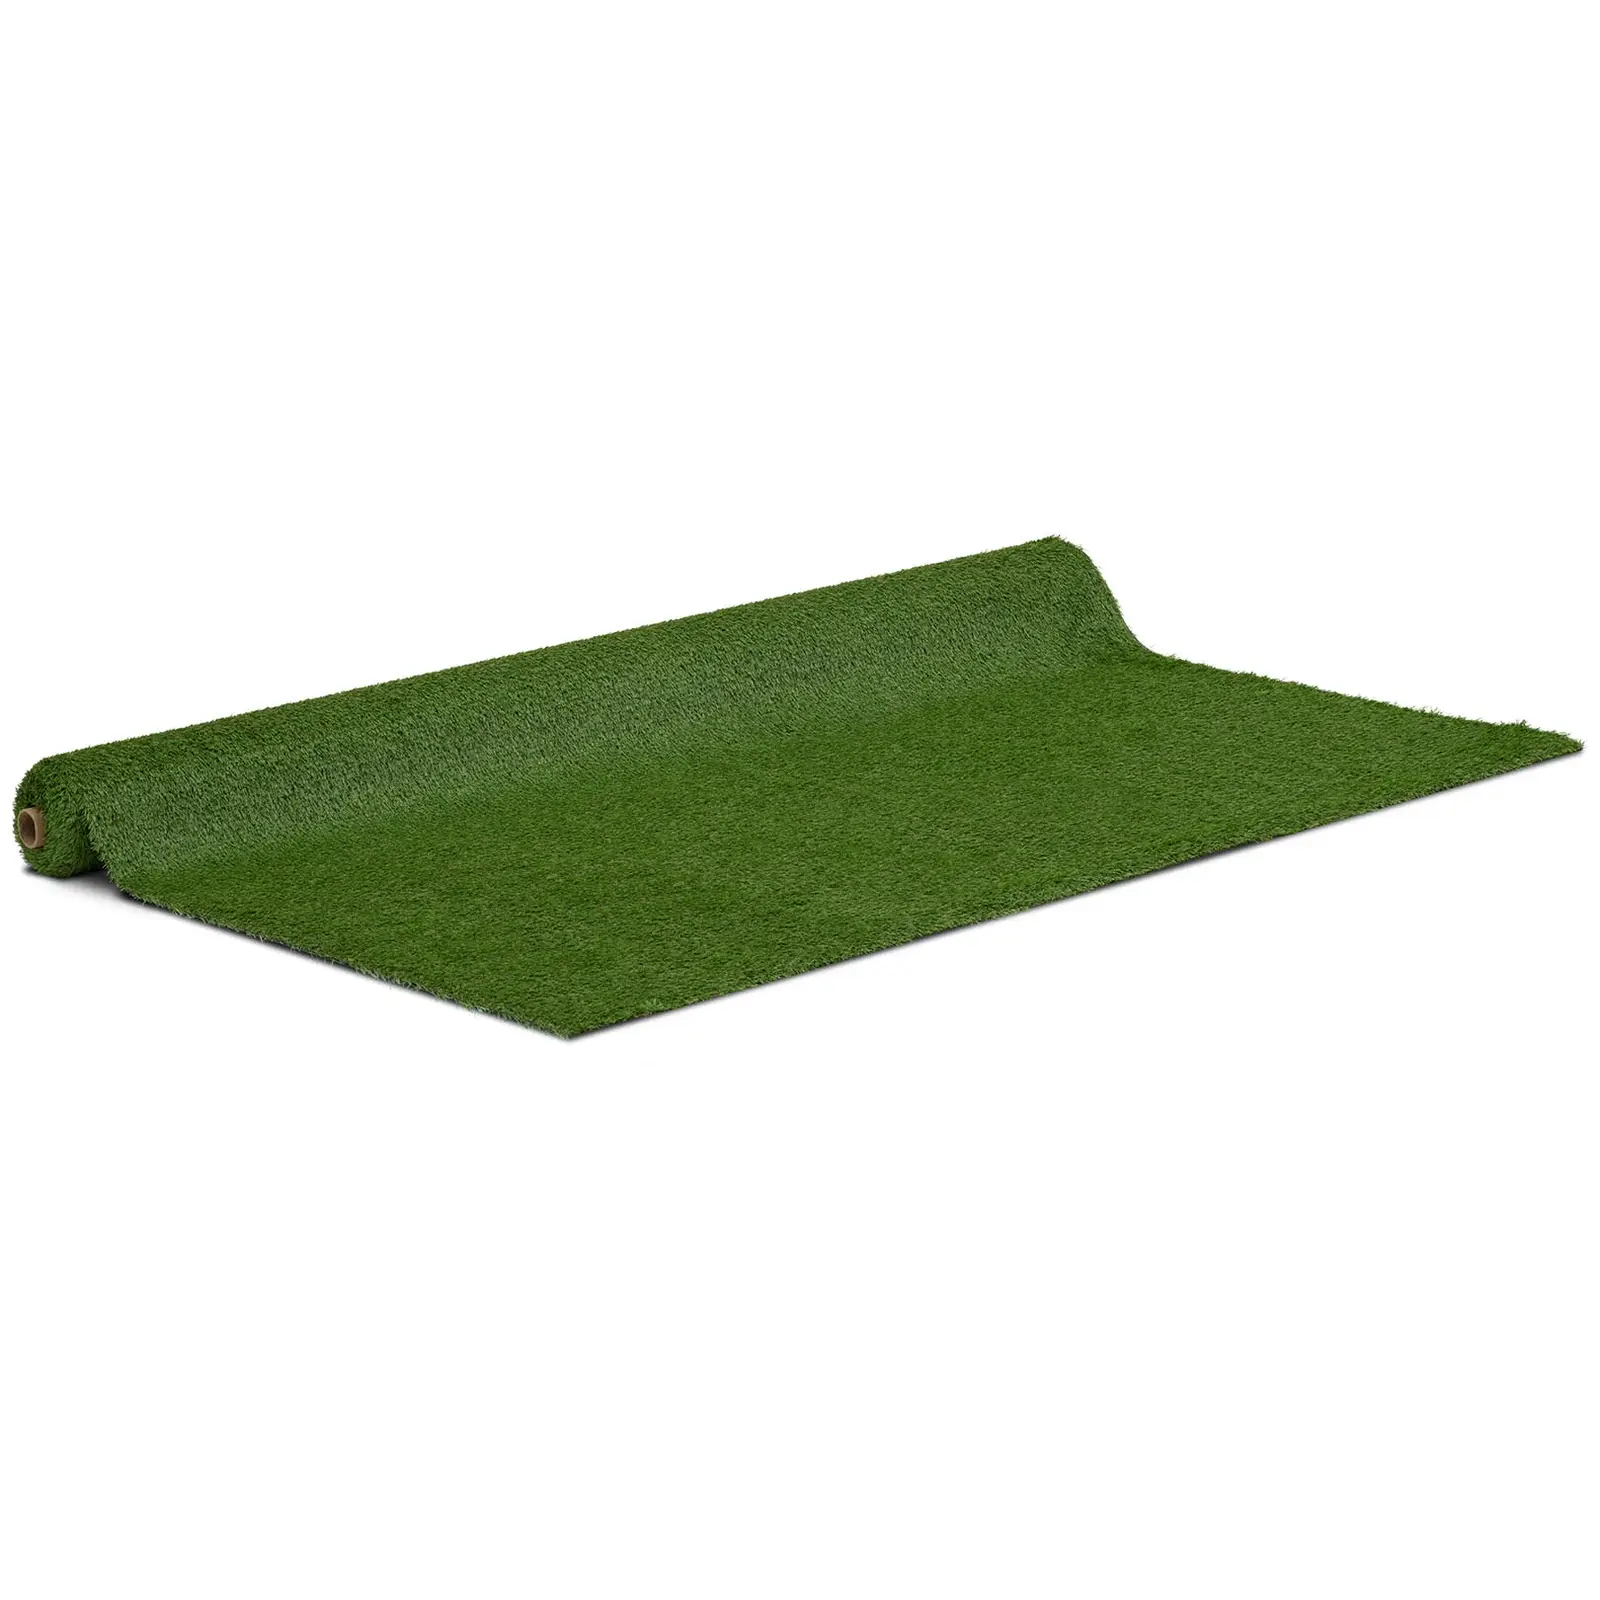 Artificial grass - 200 x 500 cm - Height: 20 mm - Stitch rate: 13/10 cm - UV-resistant